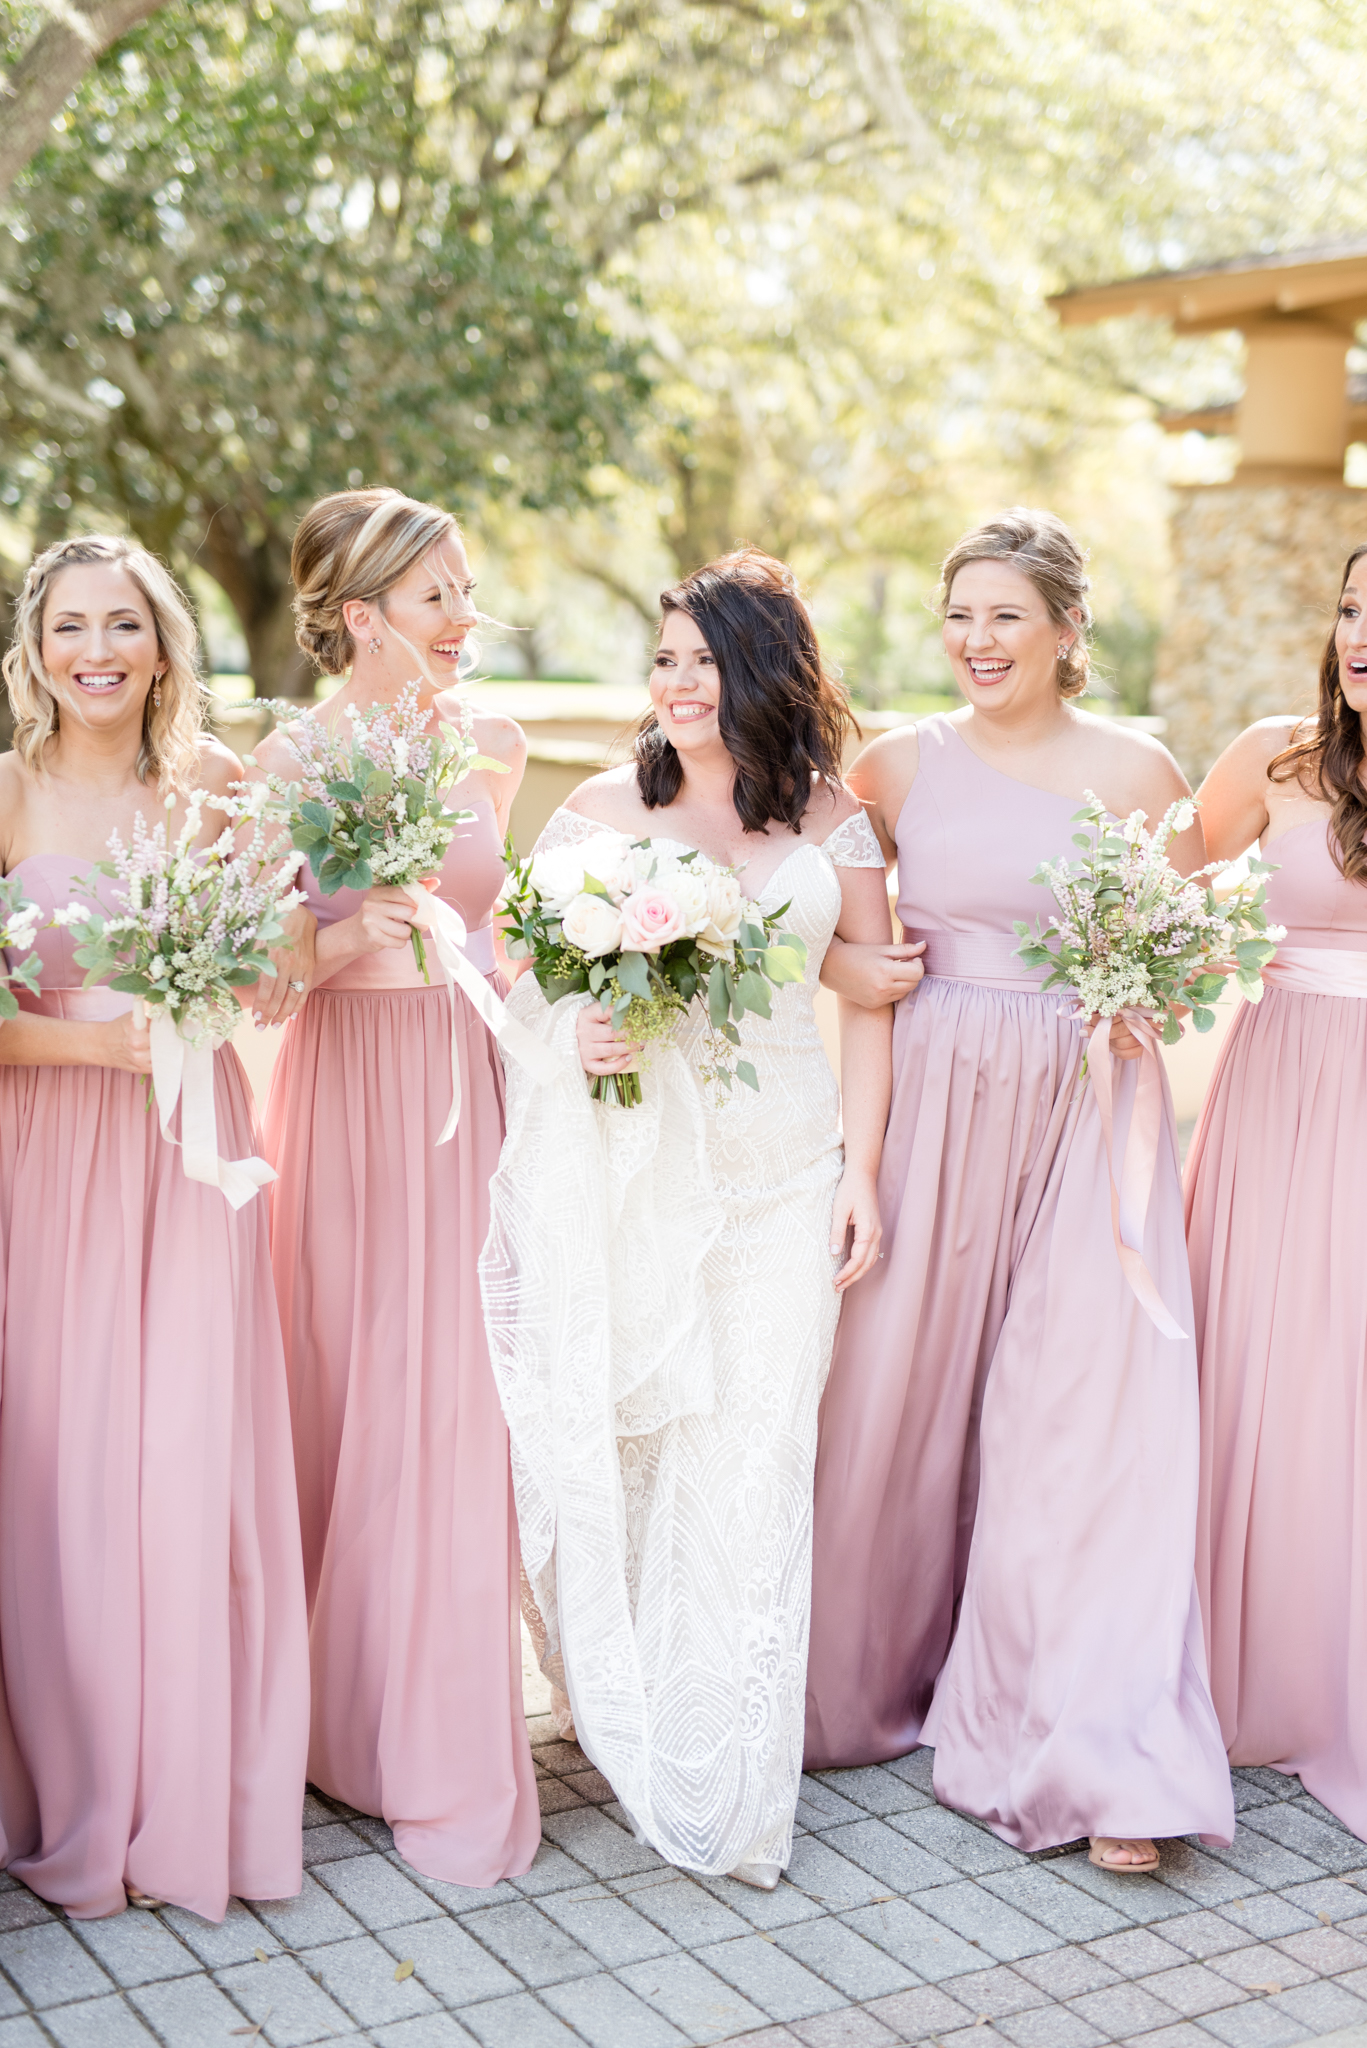 Bridal party walks and laughs.